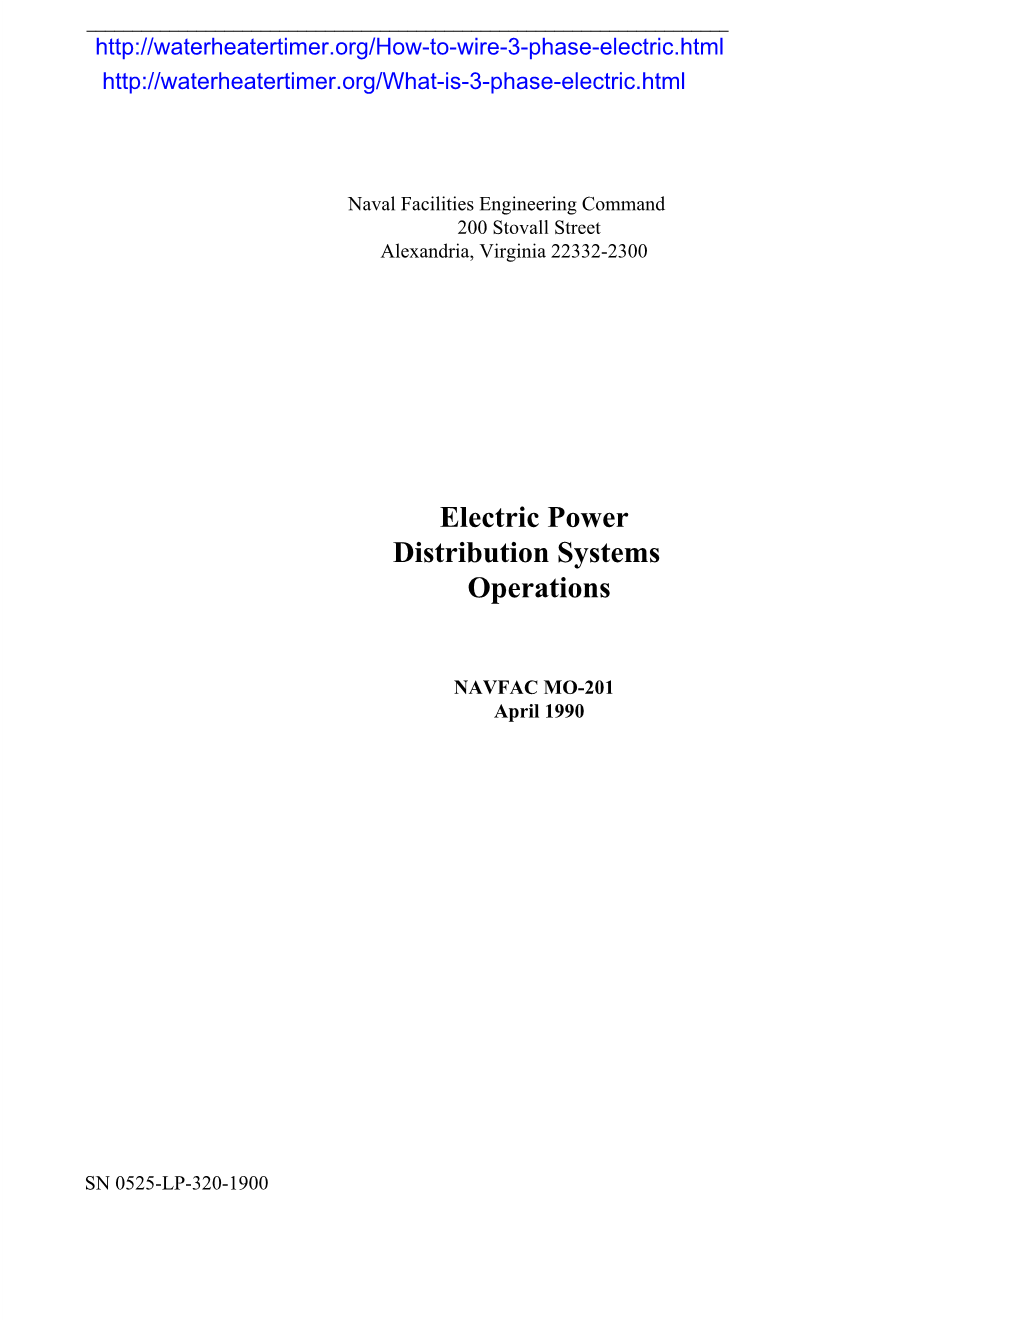 MO-201 Electric Power Distribution Systems